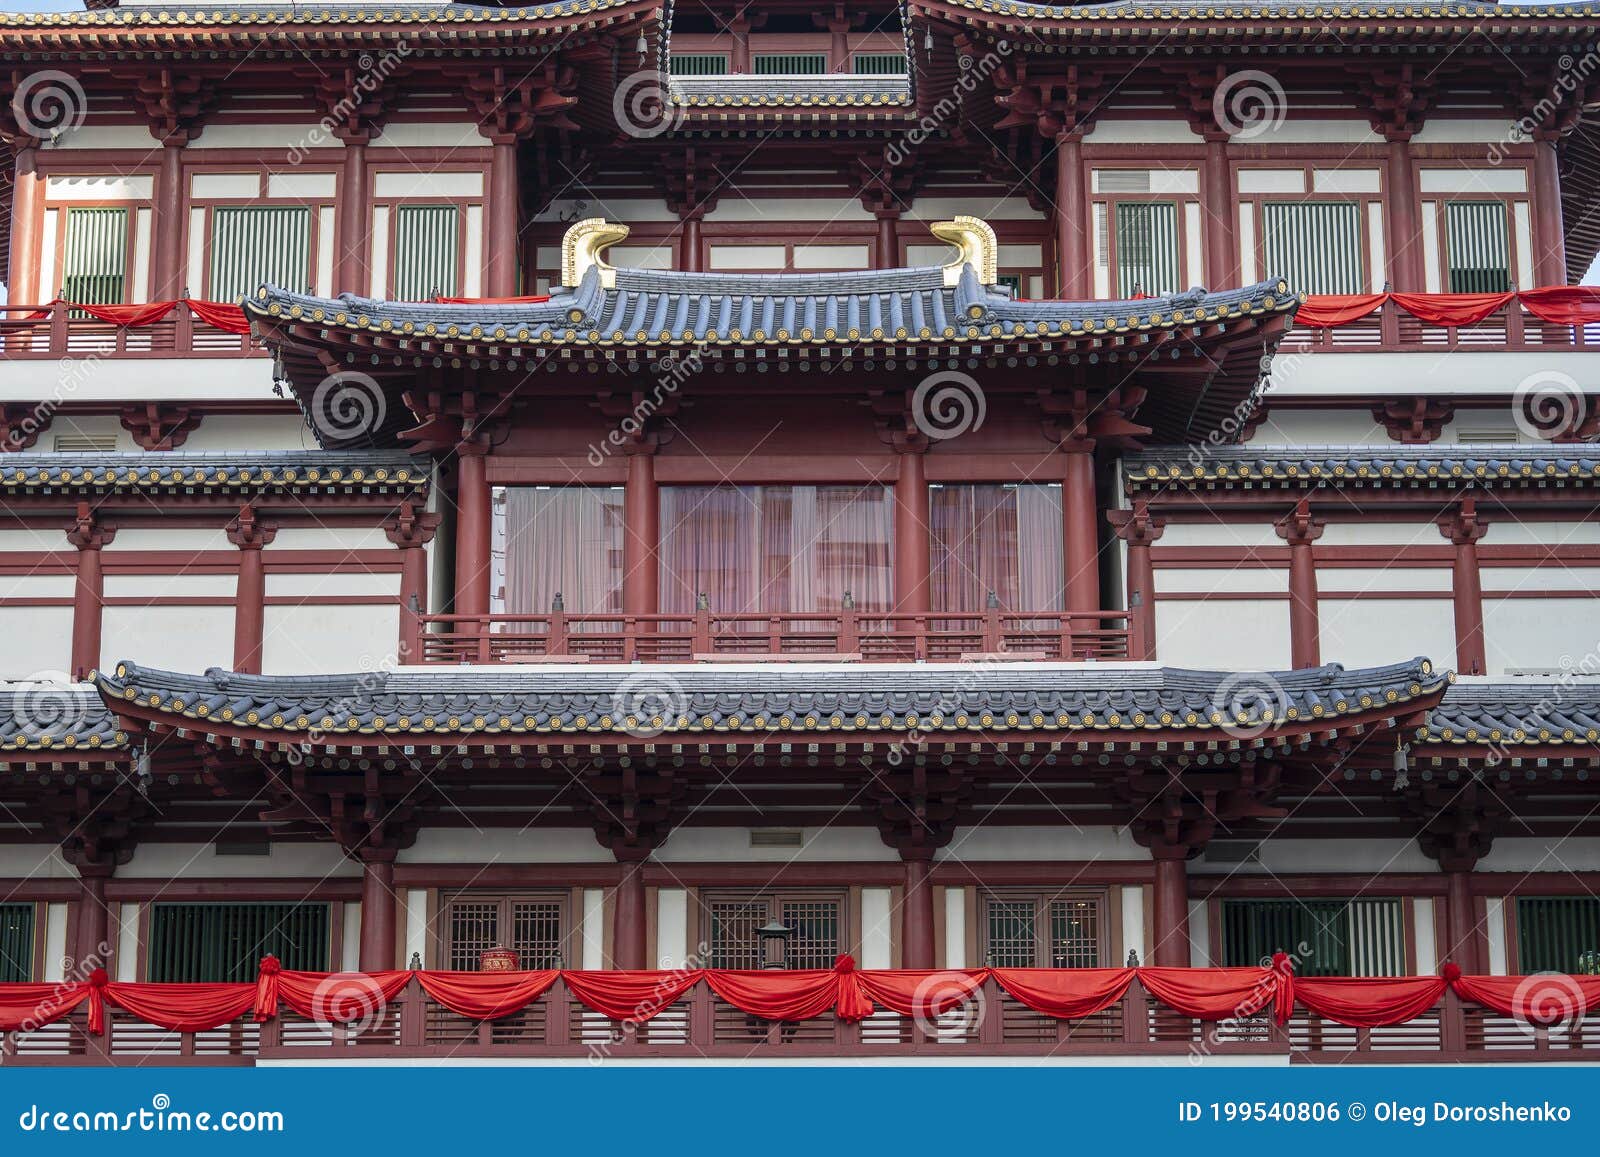 Roof Structure Of The Buddha Tooth Relic Temple And Museum Chinatown Singapore Stock Photo Image Of Oriental Famous 199540806